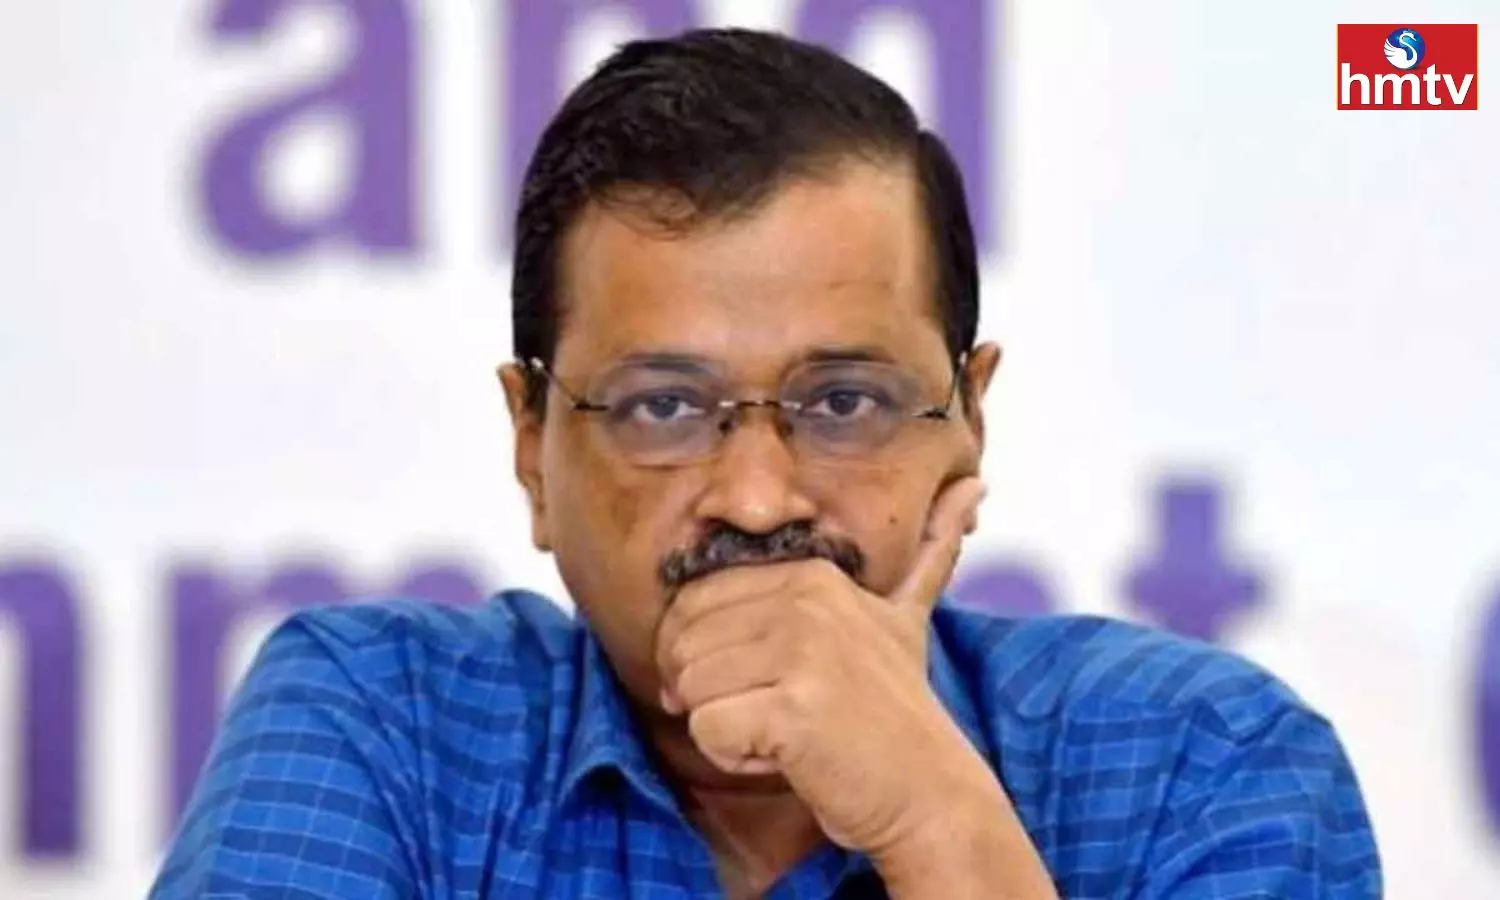 There Is No Evidence That I Have Done Anything Wrong Says Arvind Kejriwal